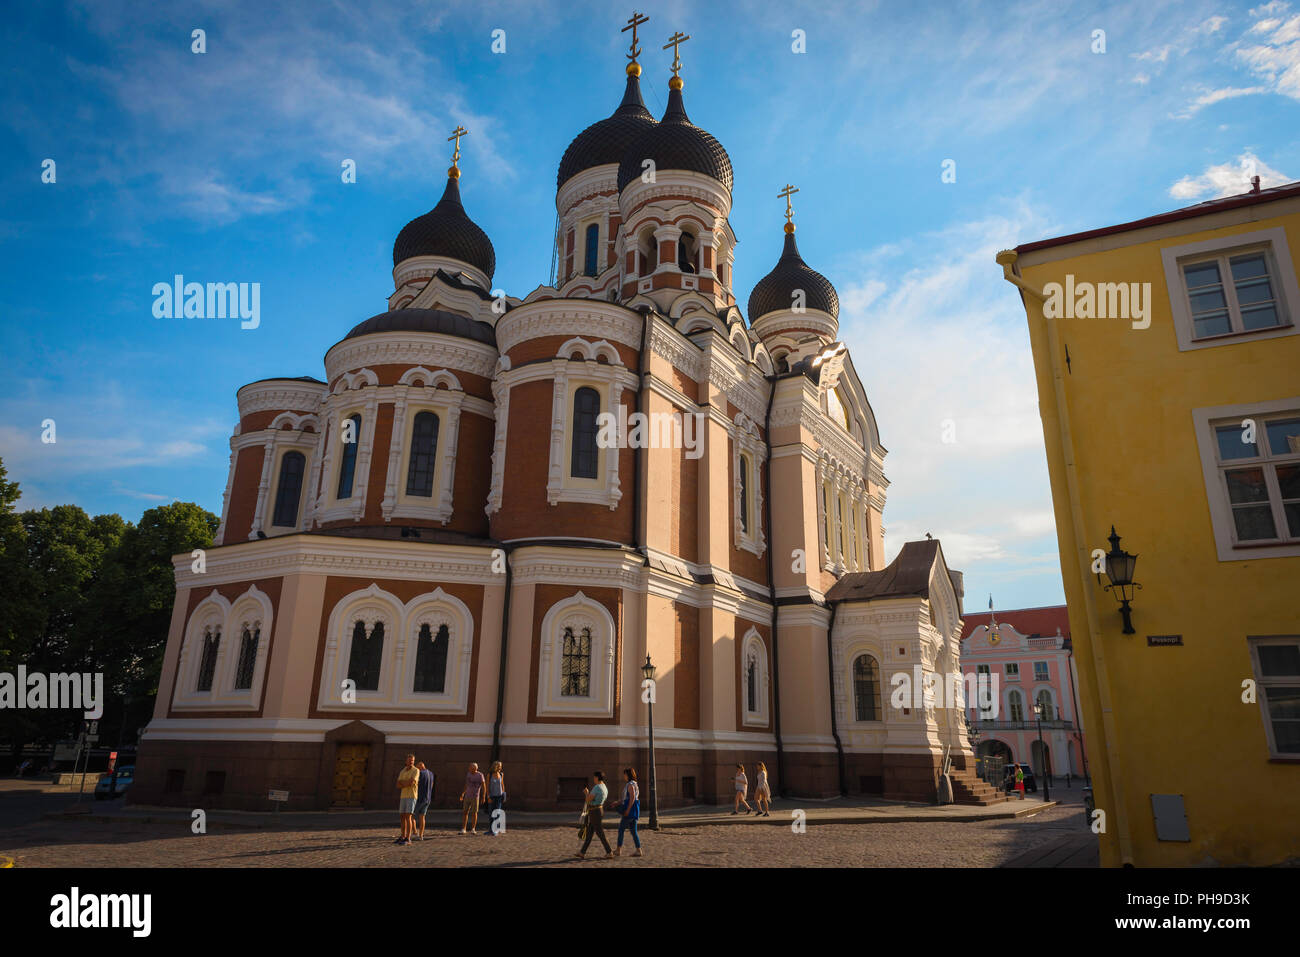 Tallinn cathedral, ground-level view of the Alexander Nevsky Orthodox Cathedral sited on Toompea Hill in the centre of Tallinn, Estonia. Stock Photo